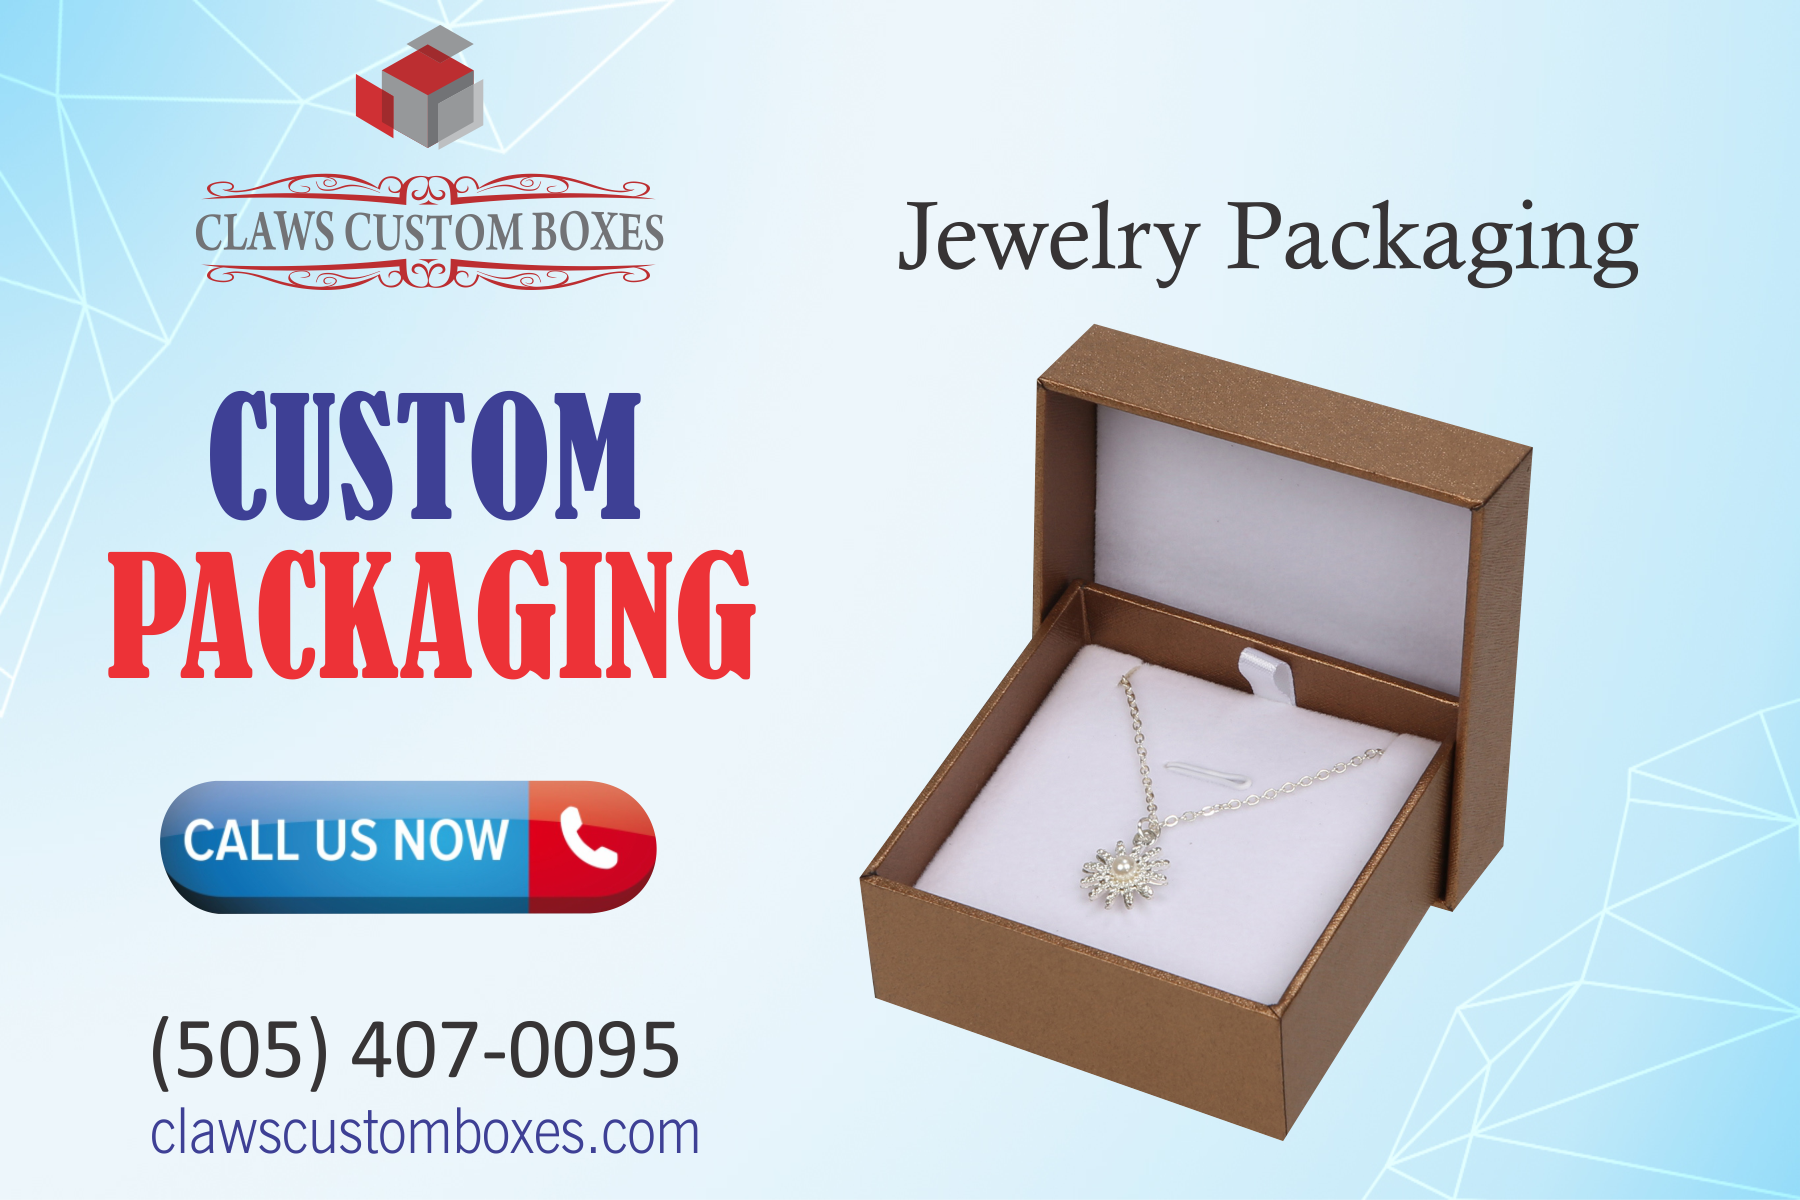 Custom Jewelry packaging are available at cheap prices